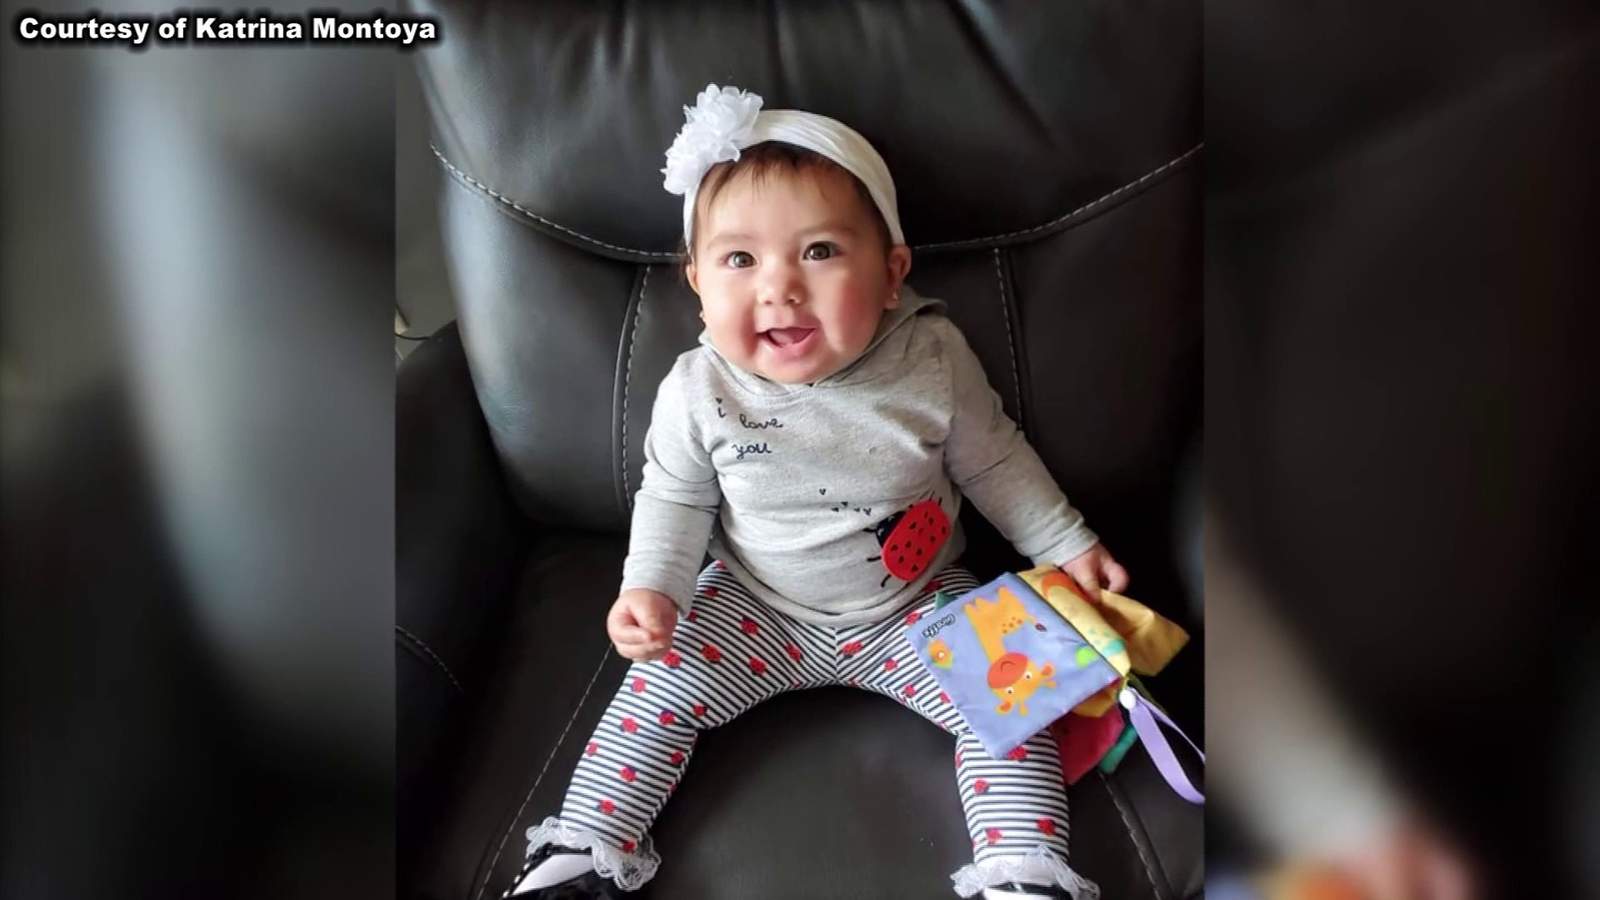 Texas baby dies after mother’s boyfriend says he stuffed her in backpack